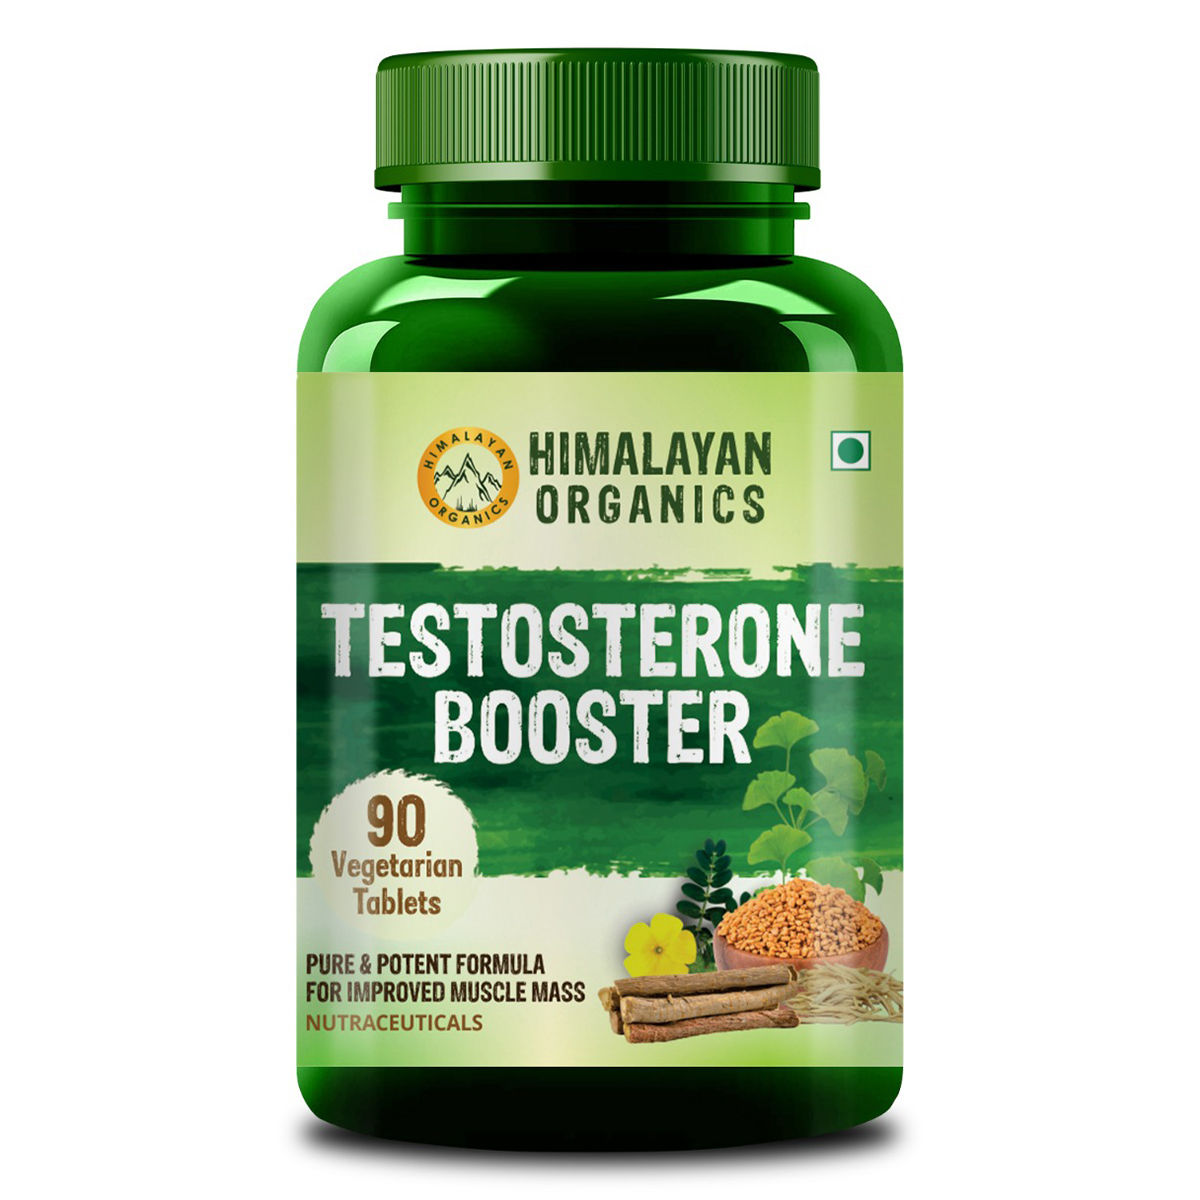 Buy Himalayan Organics Testosterone Booster, 90 Tablets Online